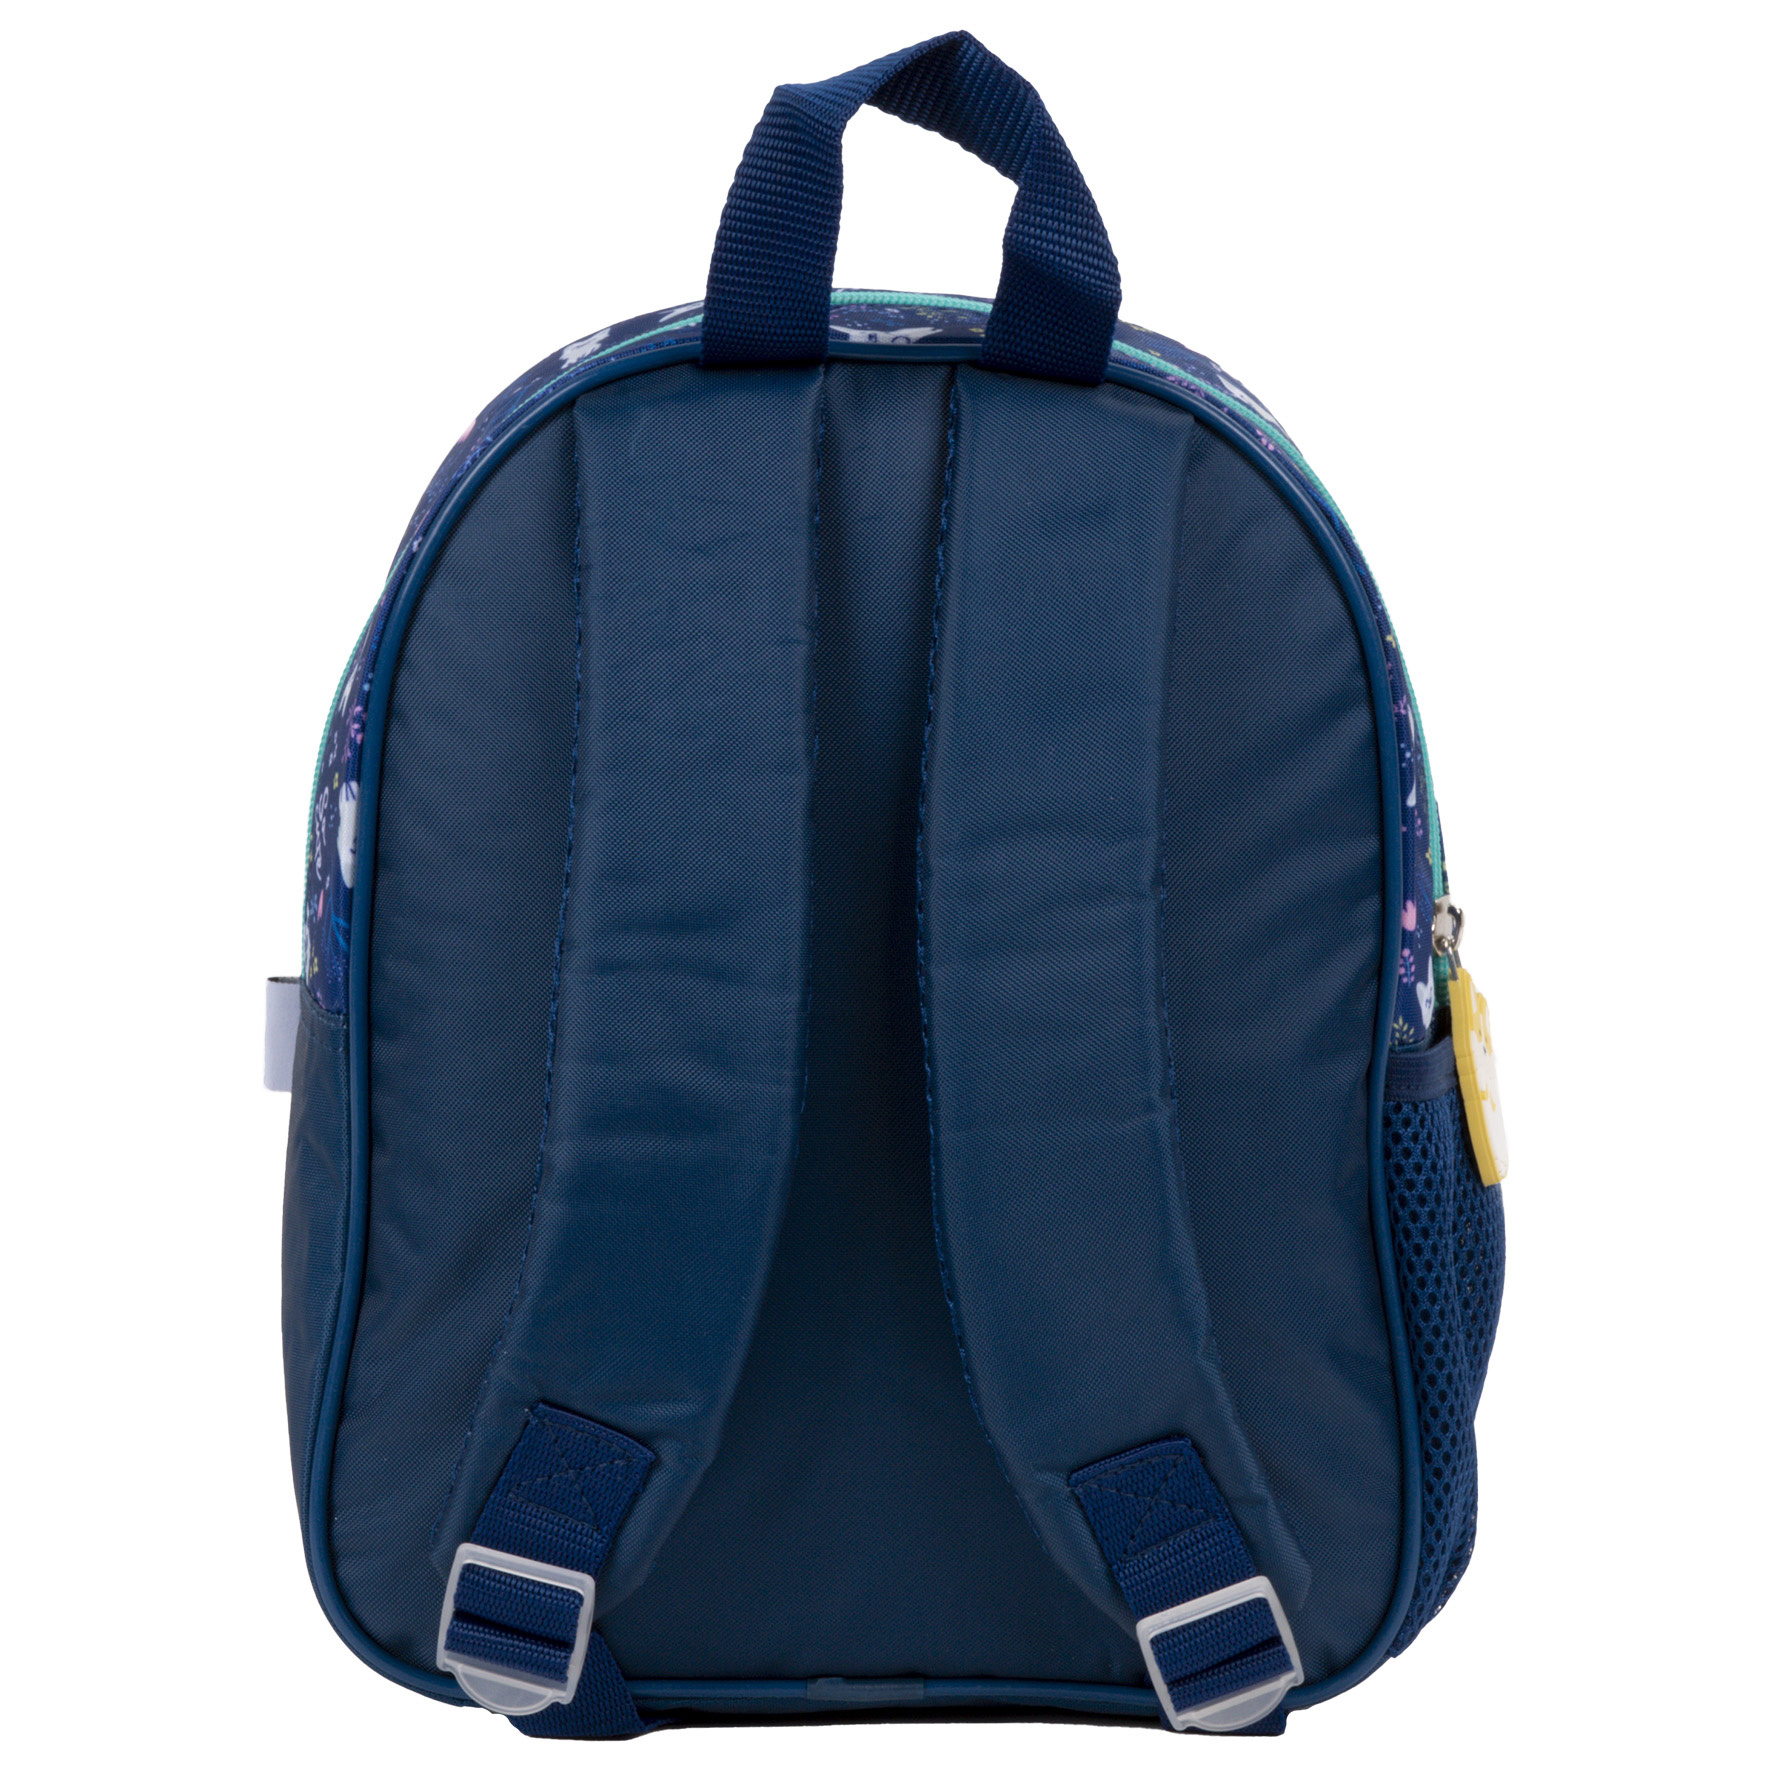 Cleo & Frank Toddler backpack, So Cute - 29 x 23 x 10 cm - Polyester